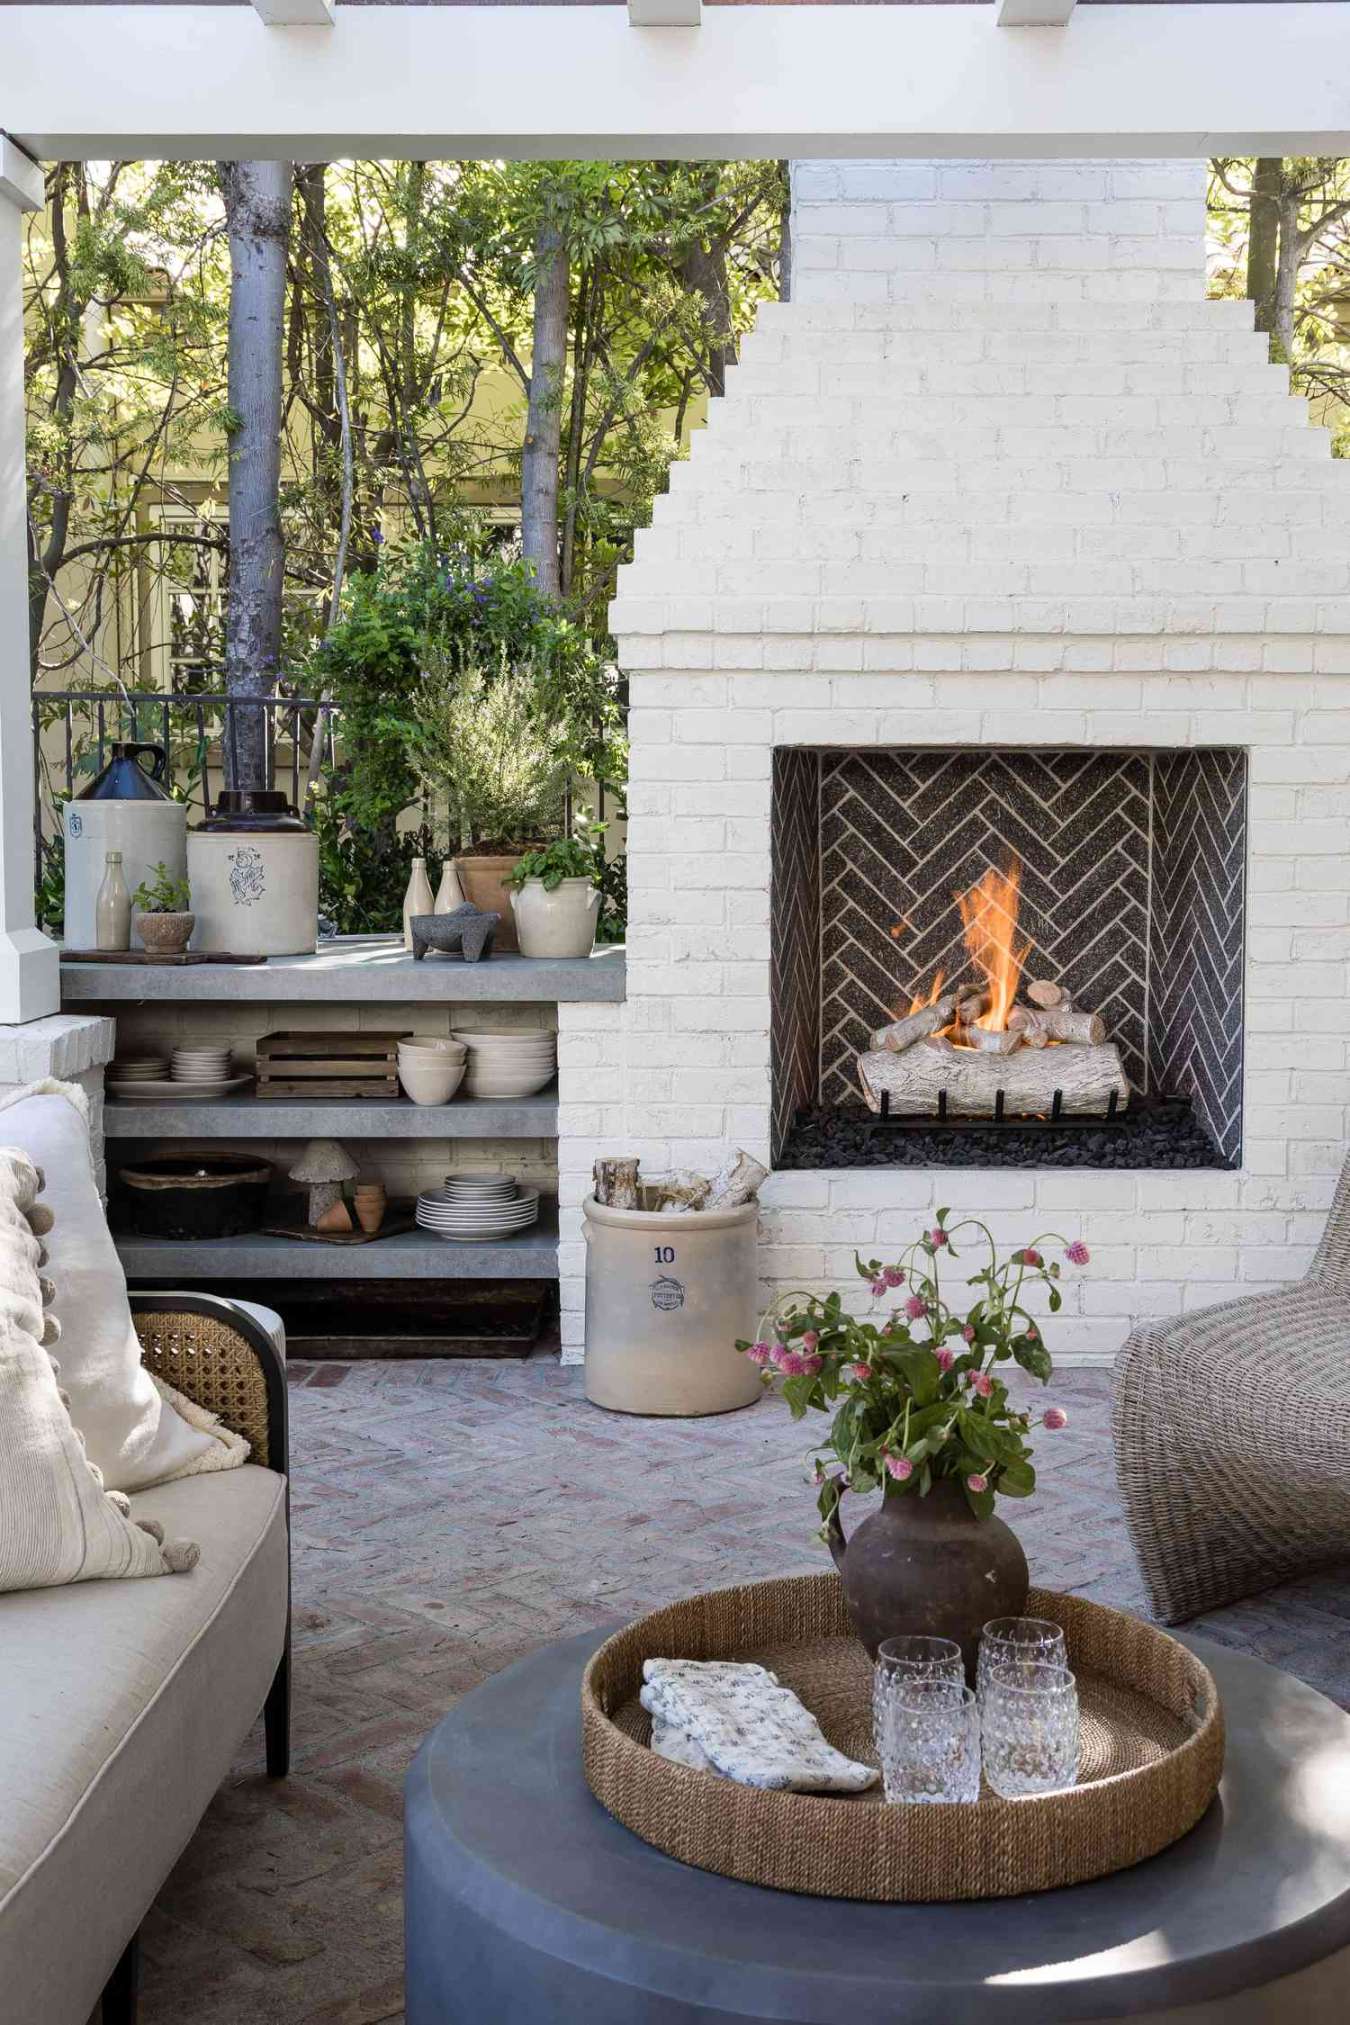 Outdoor Fireplace Ideas That Are Warm and Cozy